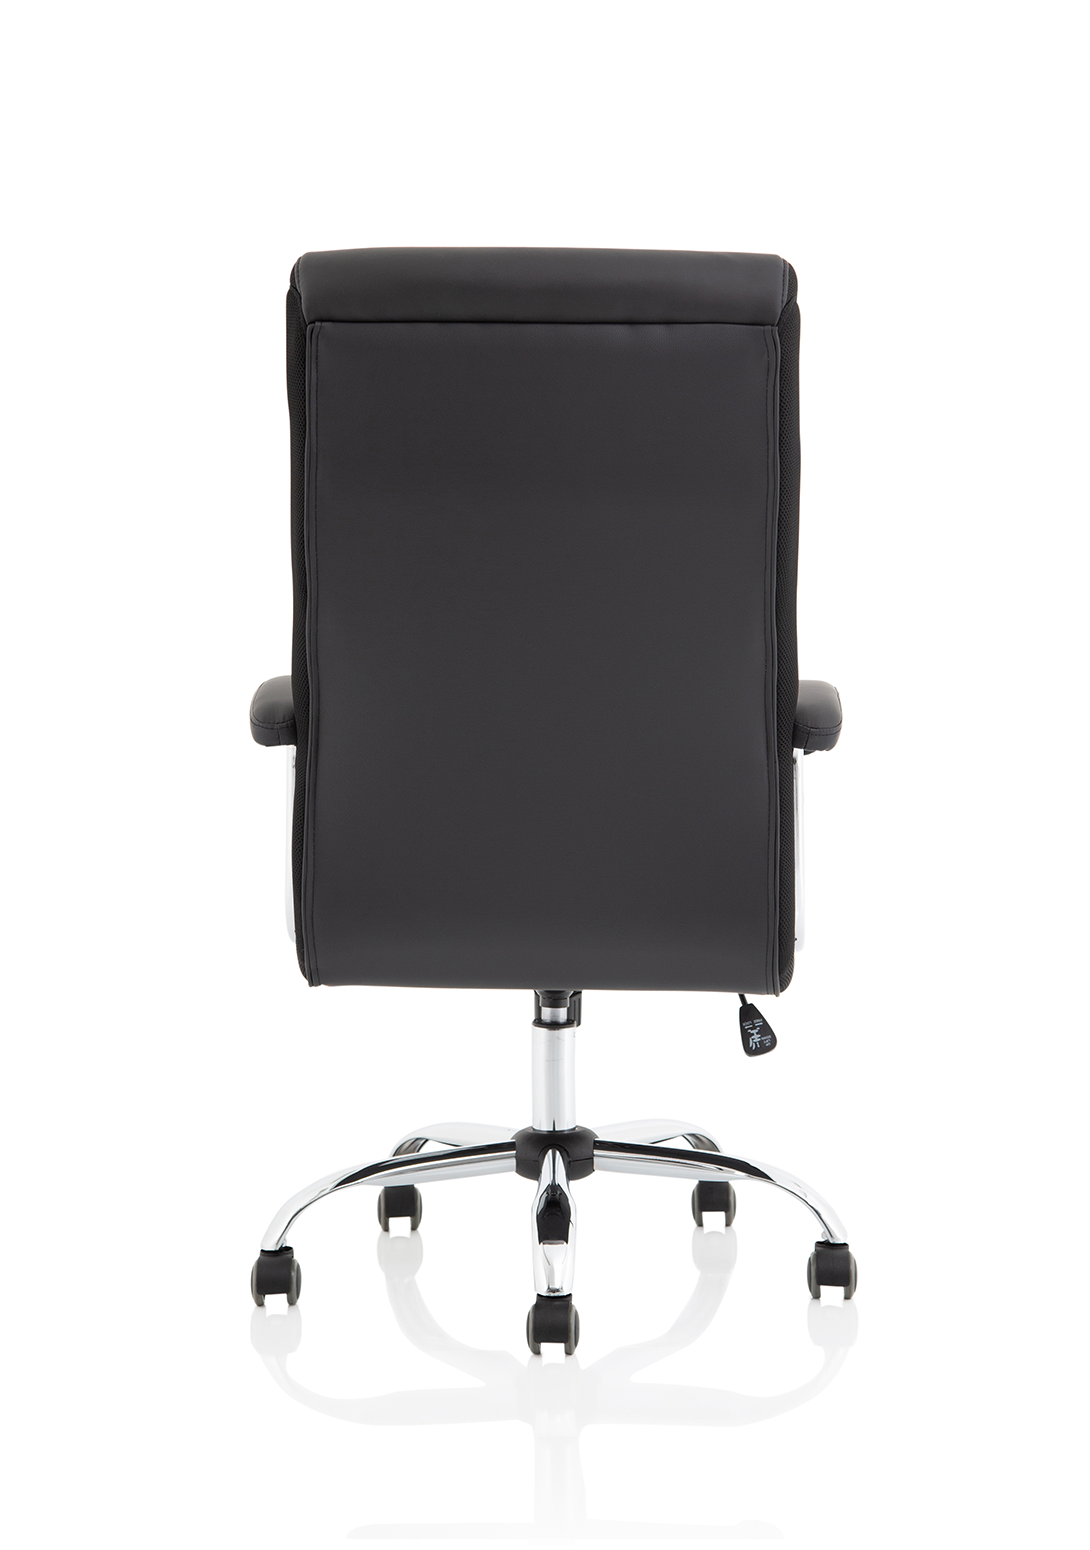 Dallas High Back Black Leather Executive Office Chair with Arms